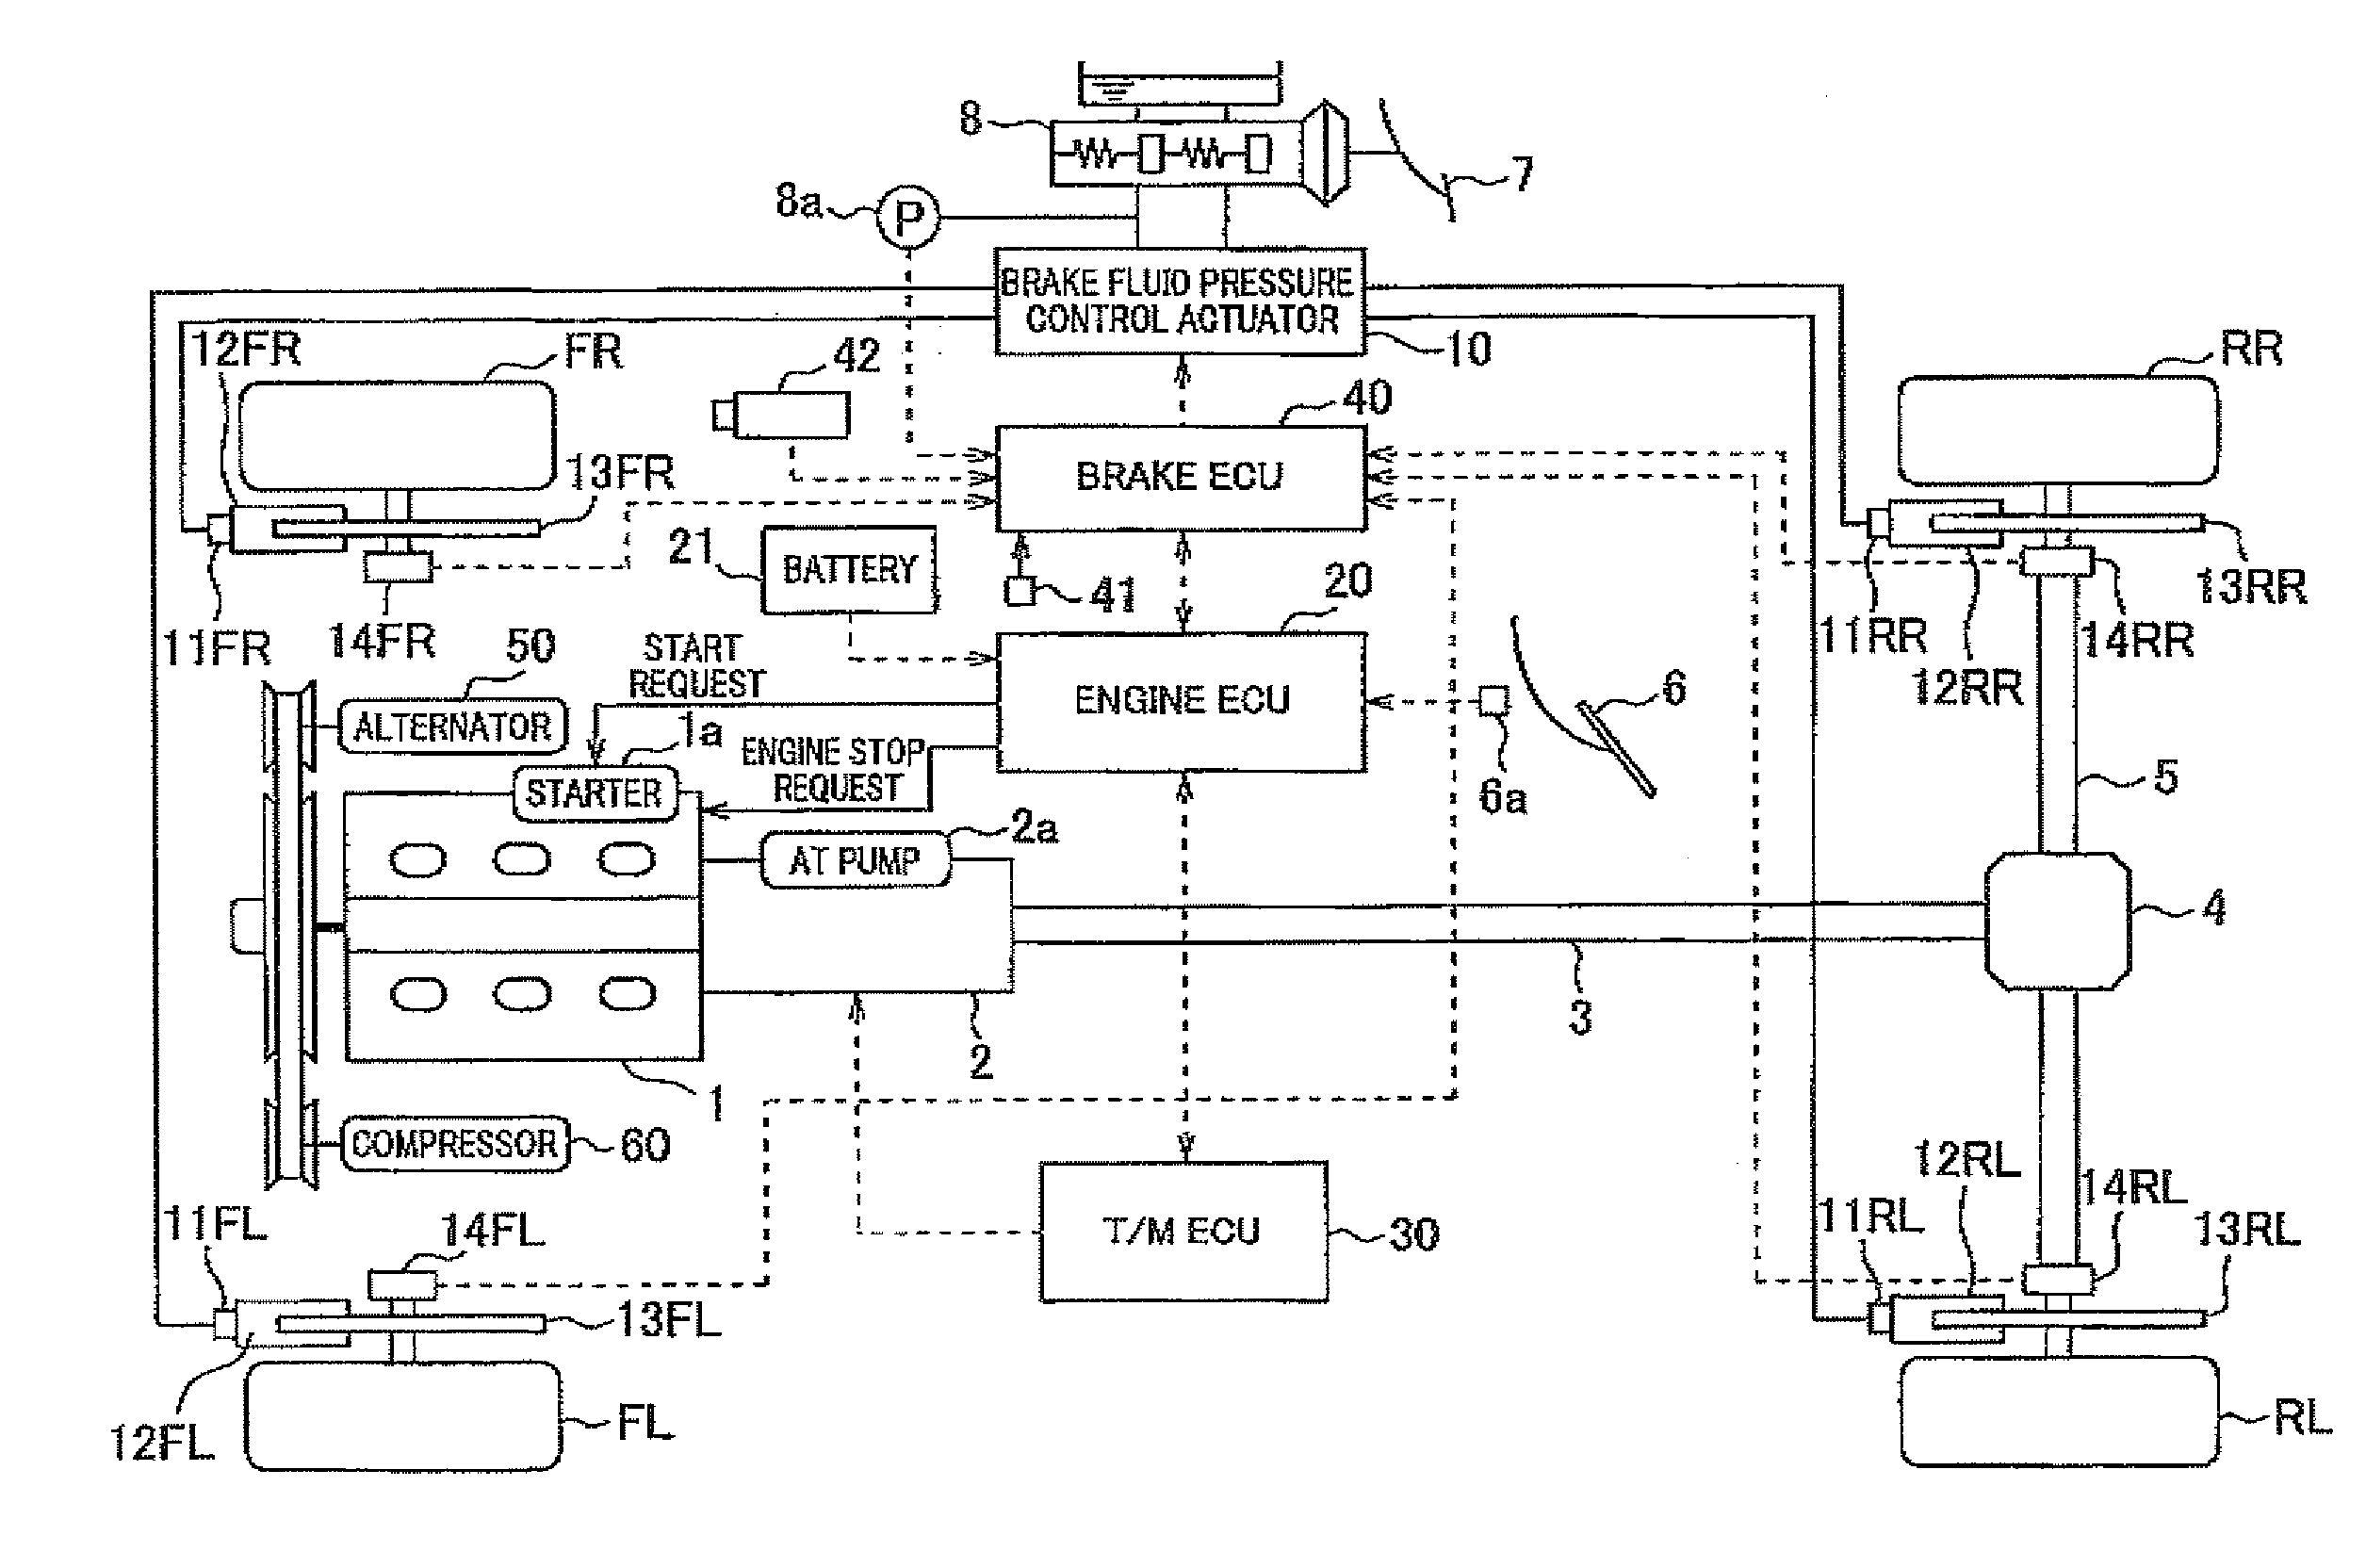 Apparatus for controlling automatic stop and restart of engine